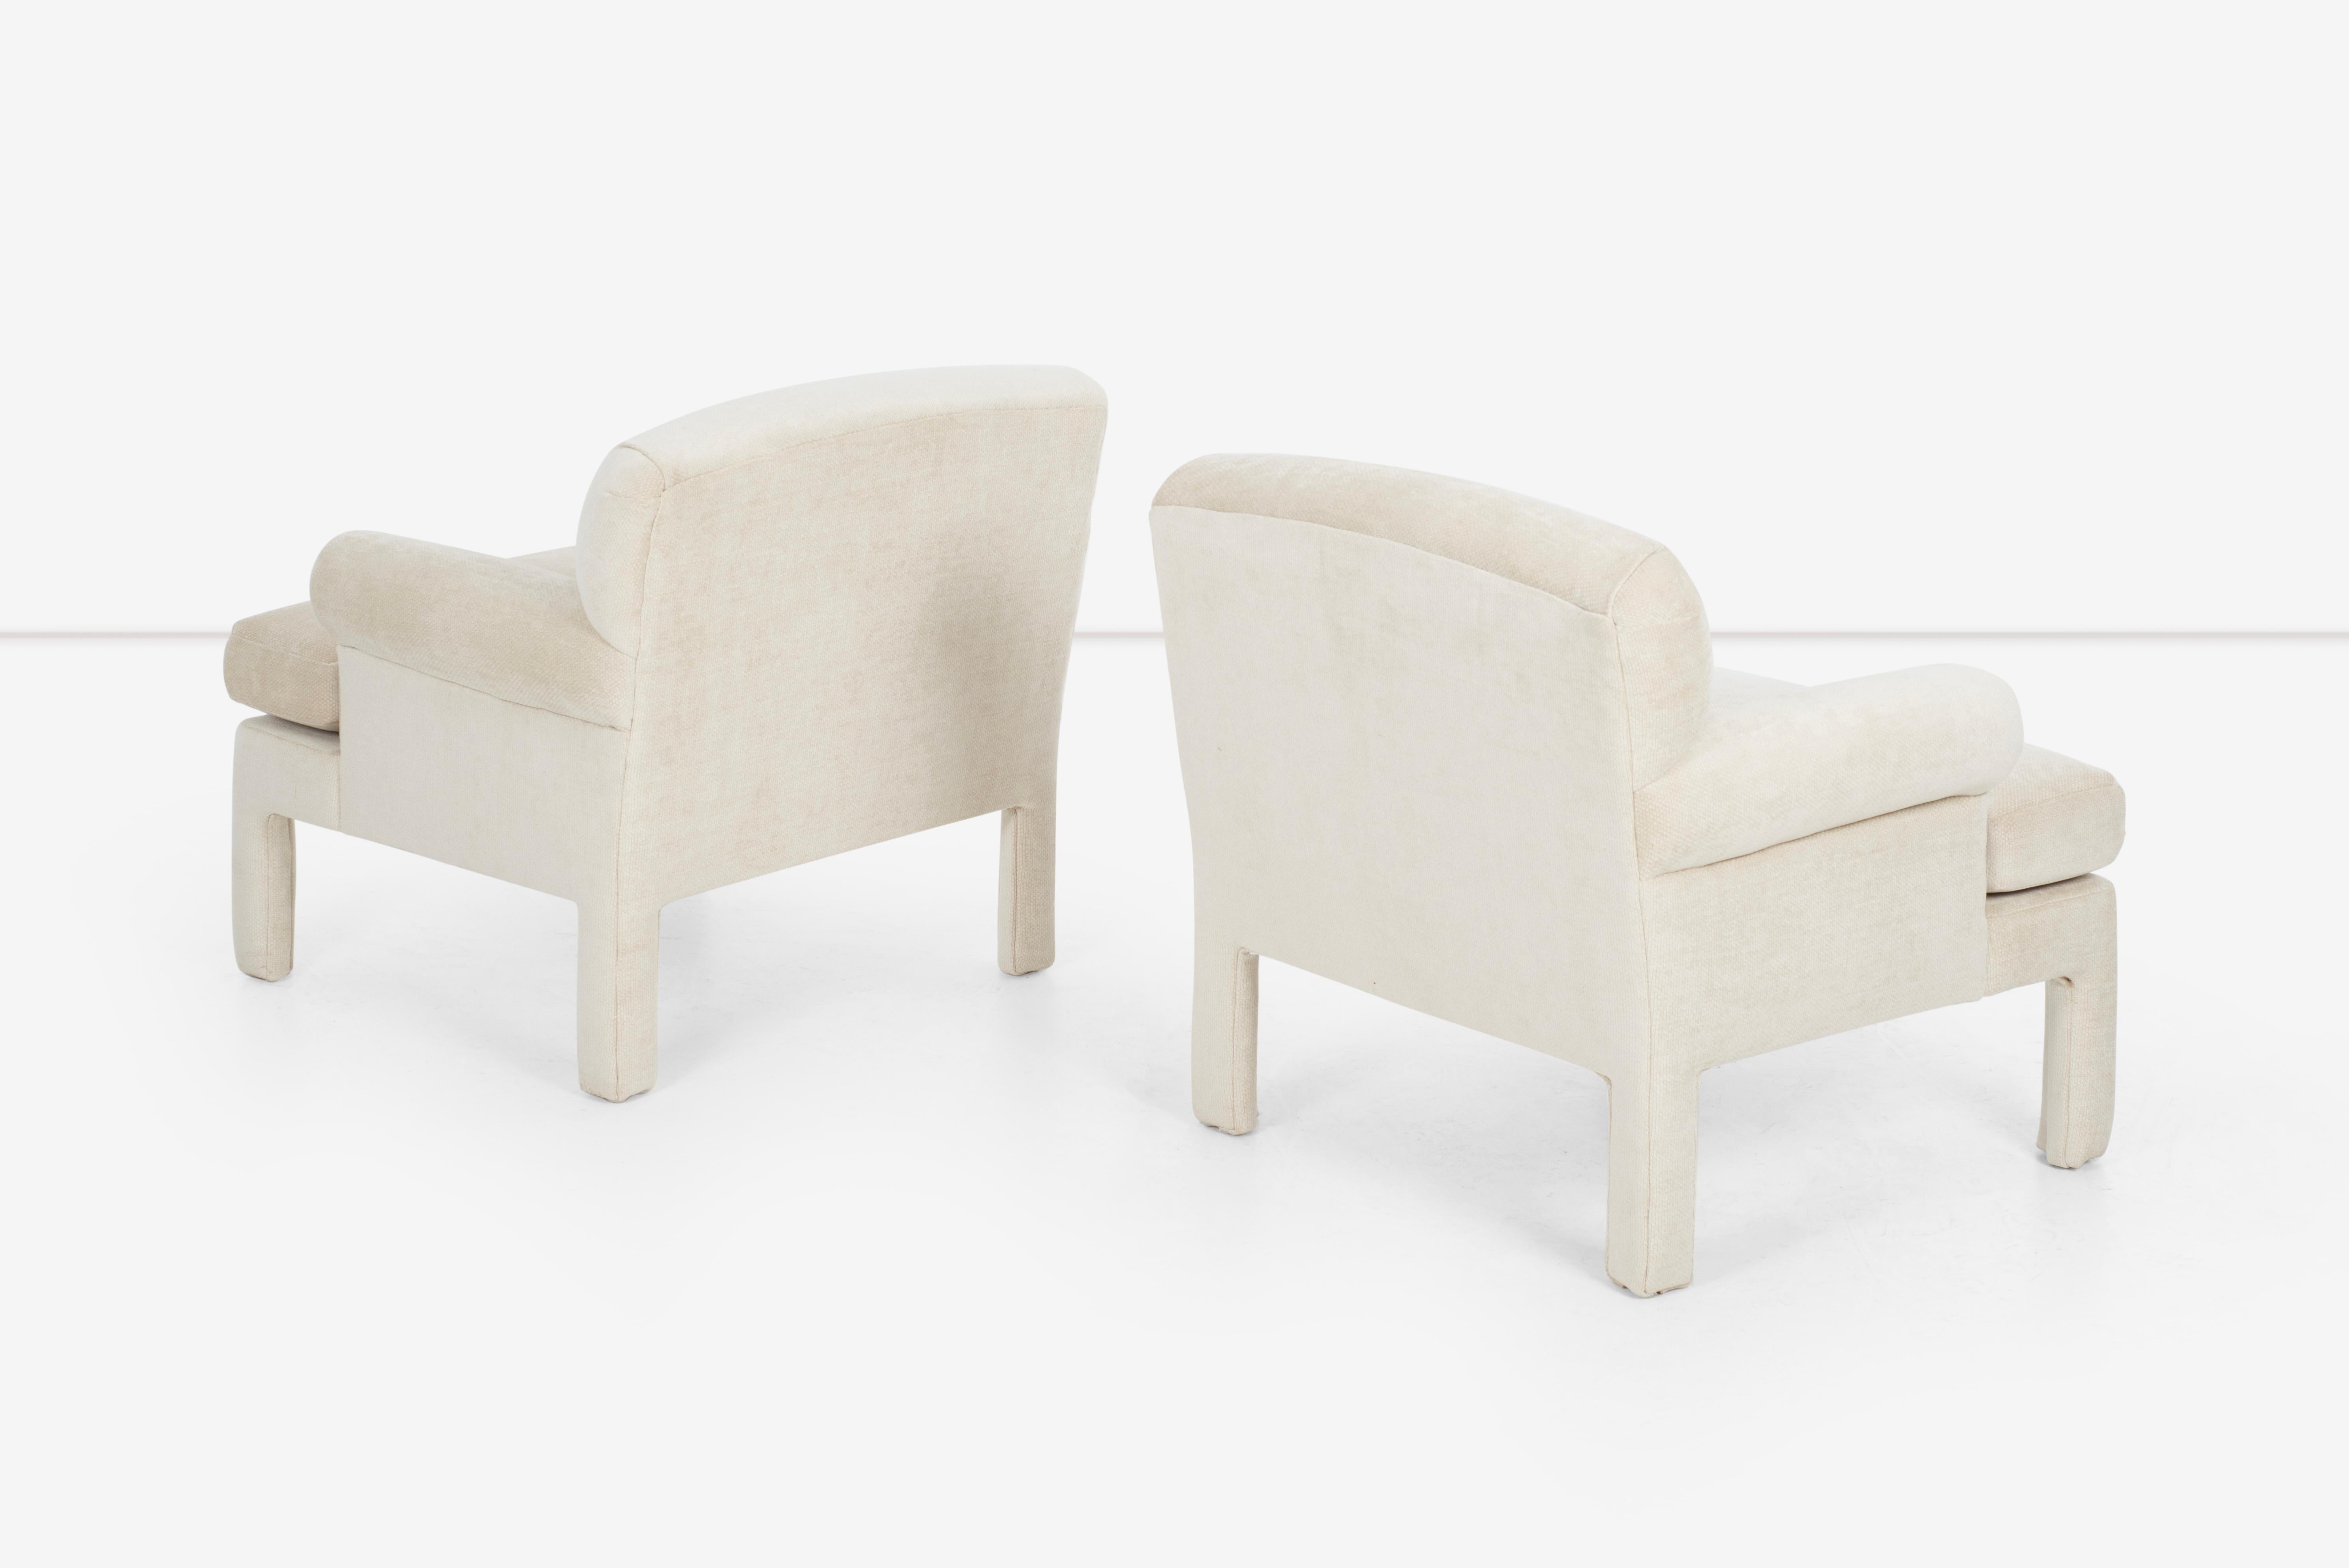 Late 20th Century Pair of Parsons Lounge Chairs in The Style of Milo Baughman